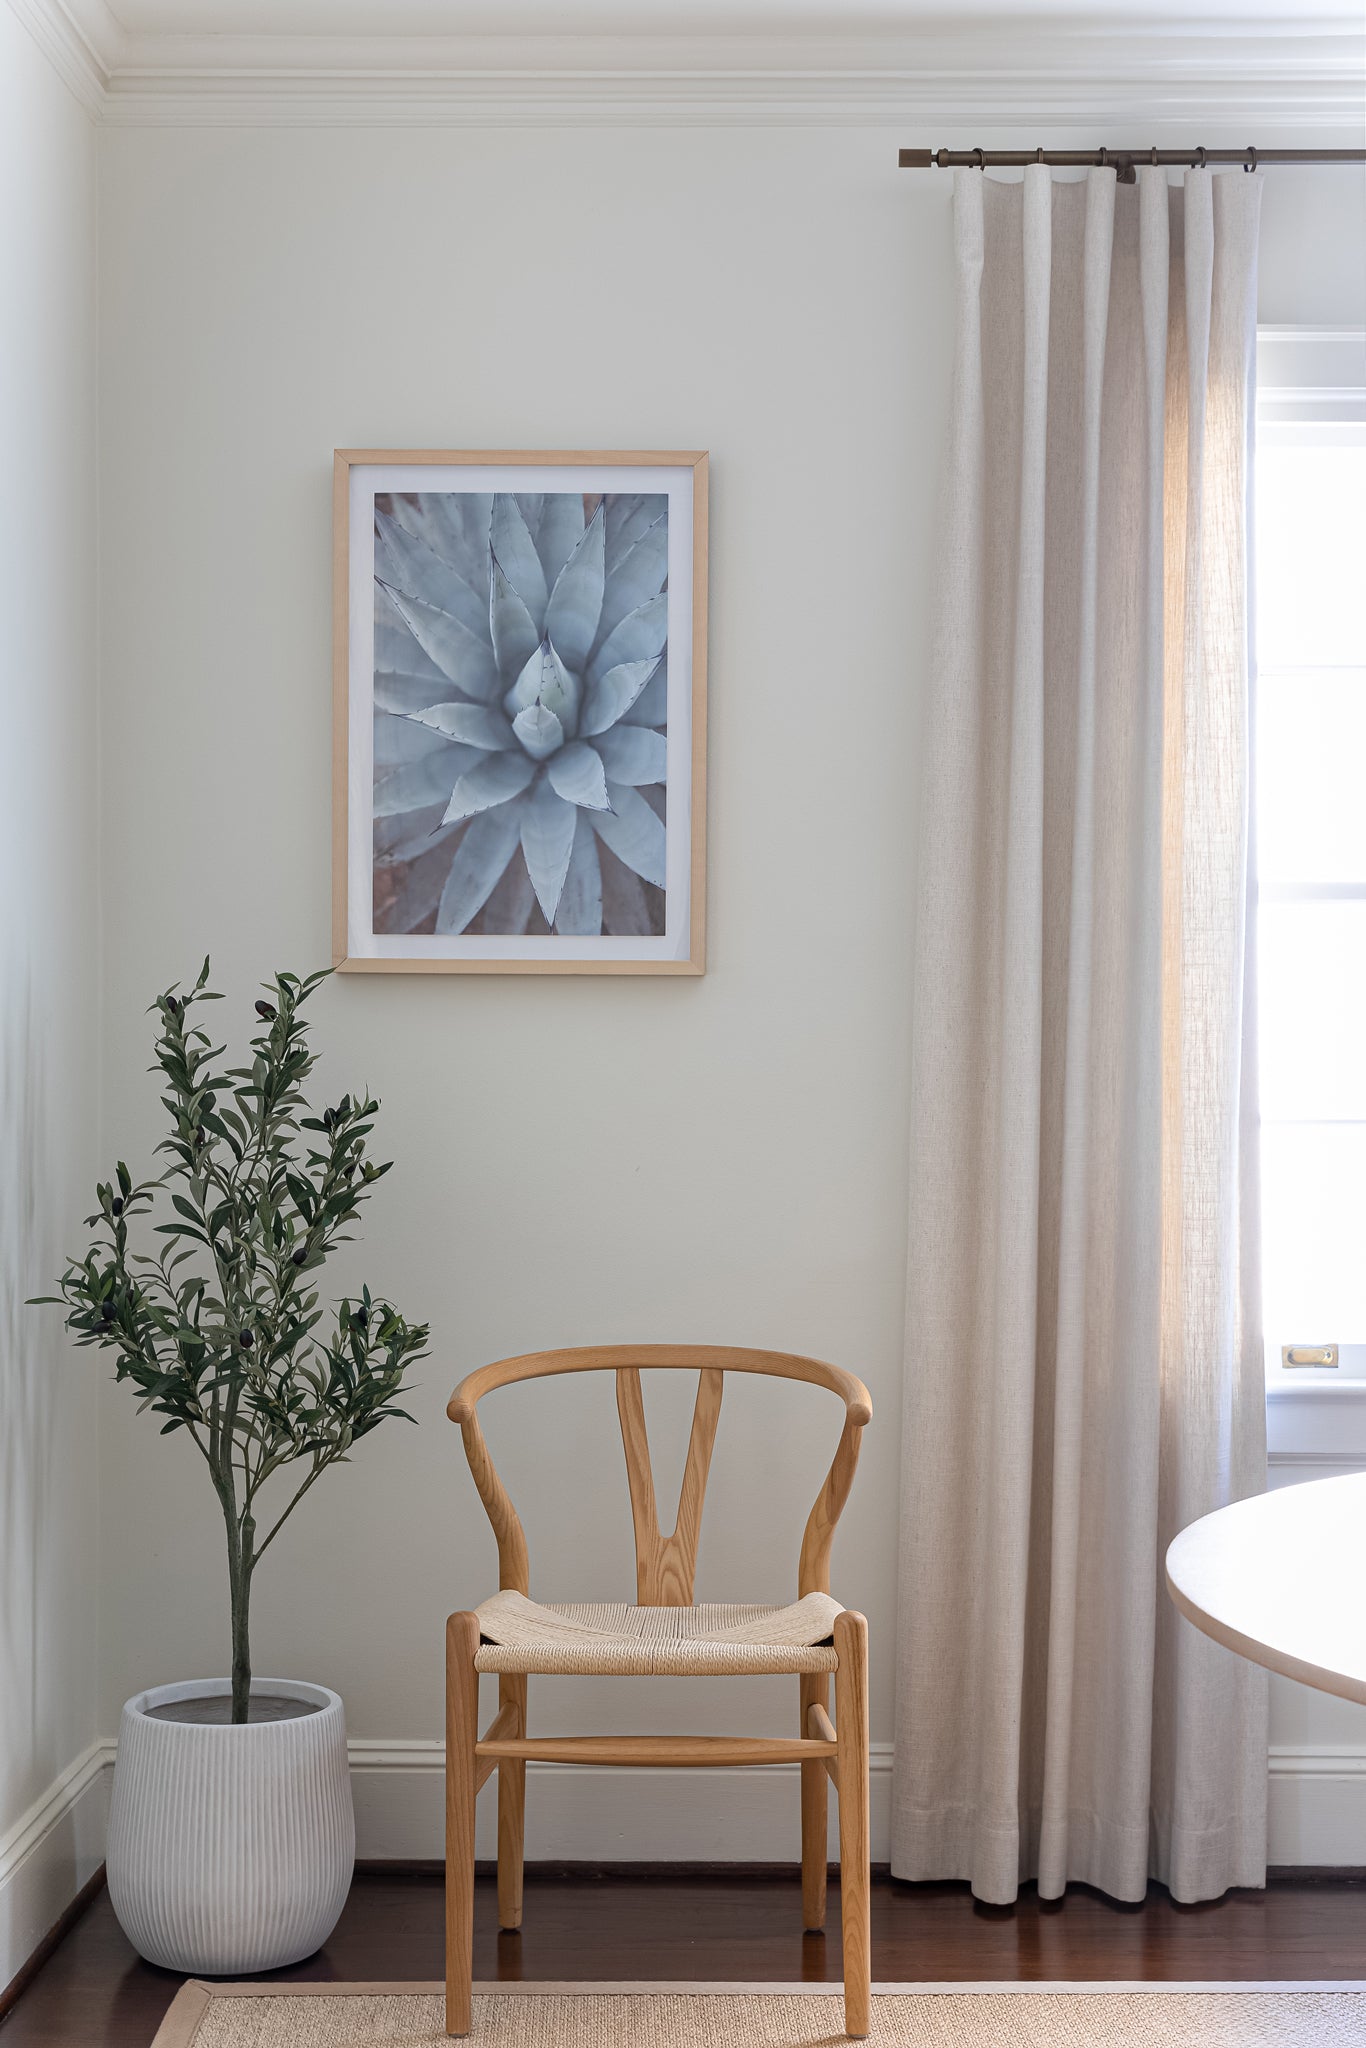 Framed Agave print hanging on wall next to window with plant and chair